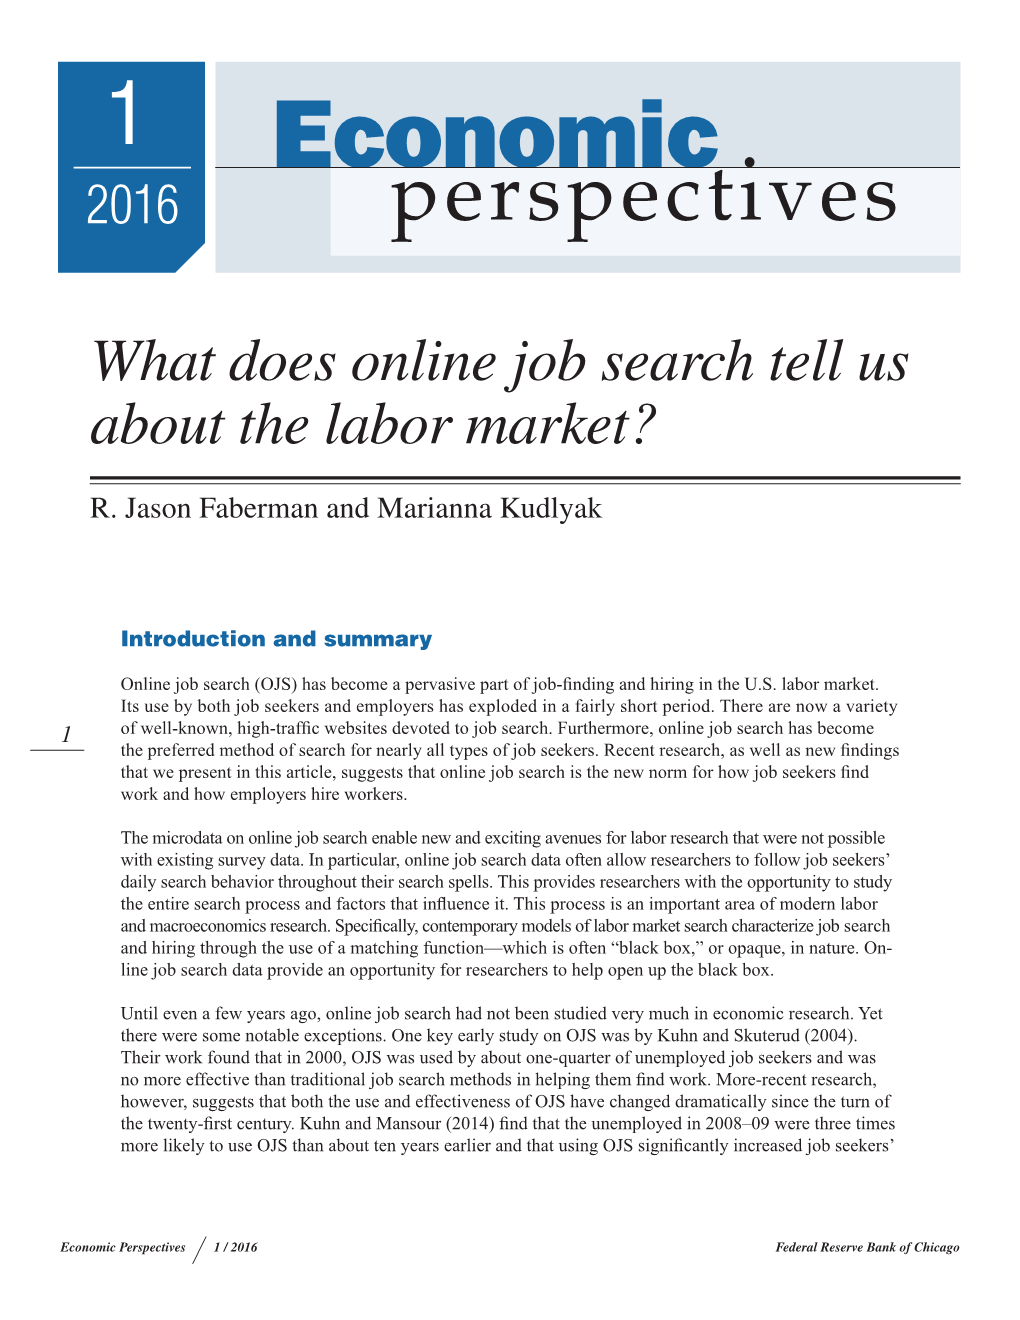 What Does Online Job Search Tell Us About the Labor Market?;